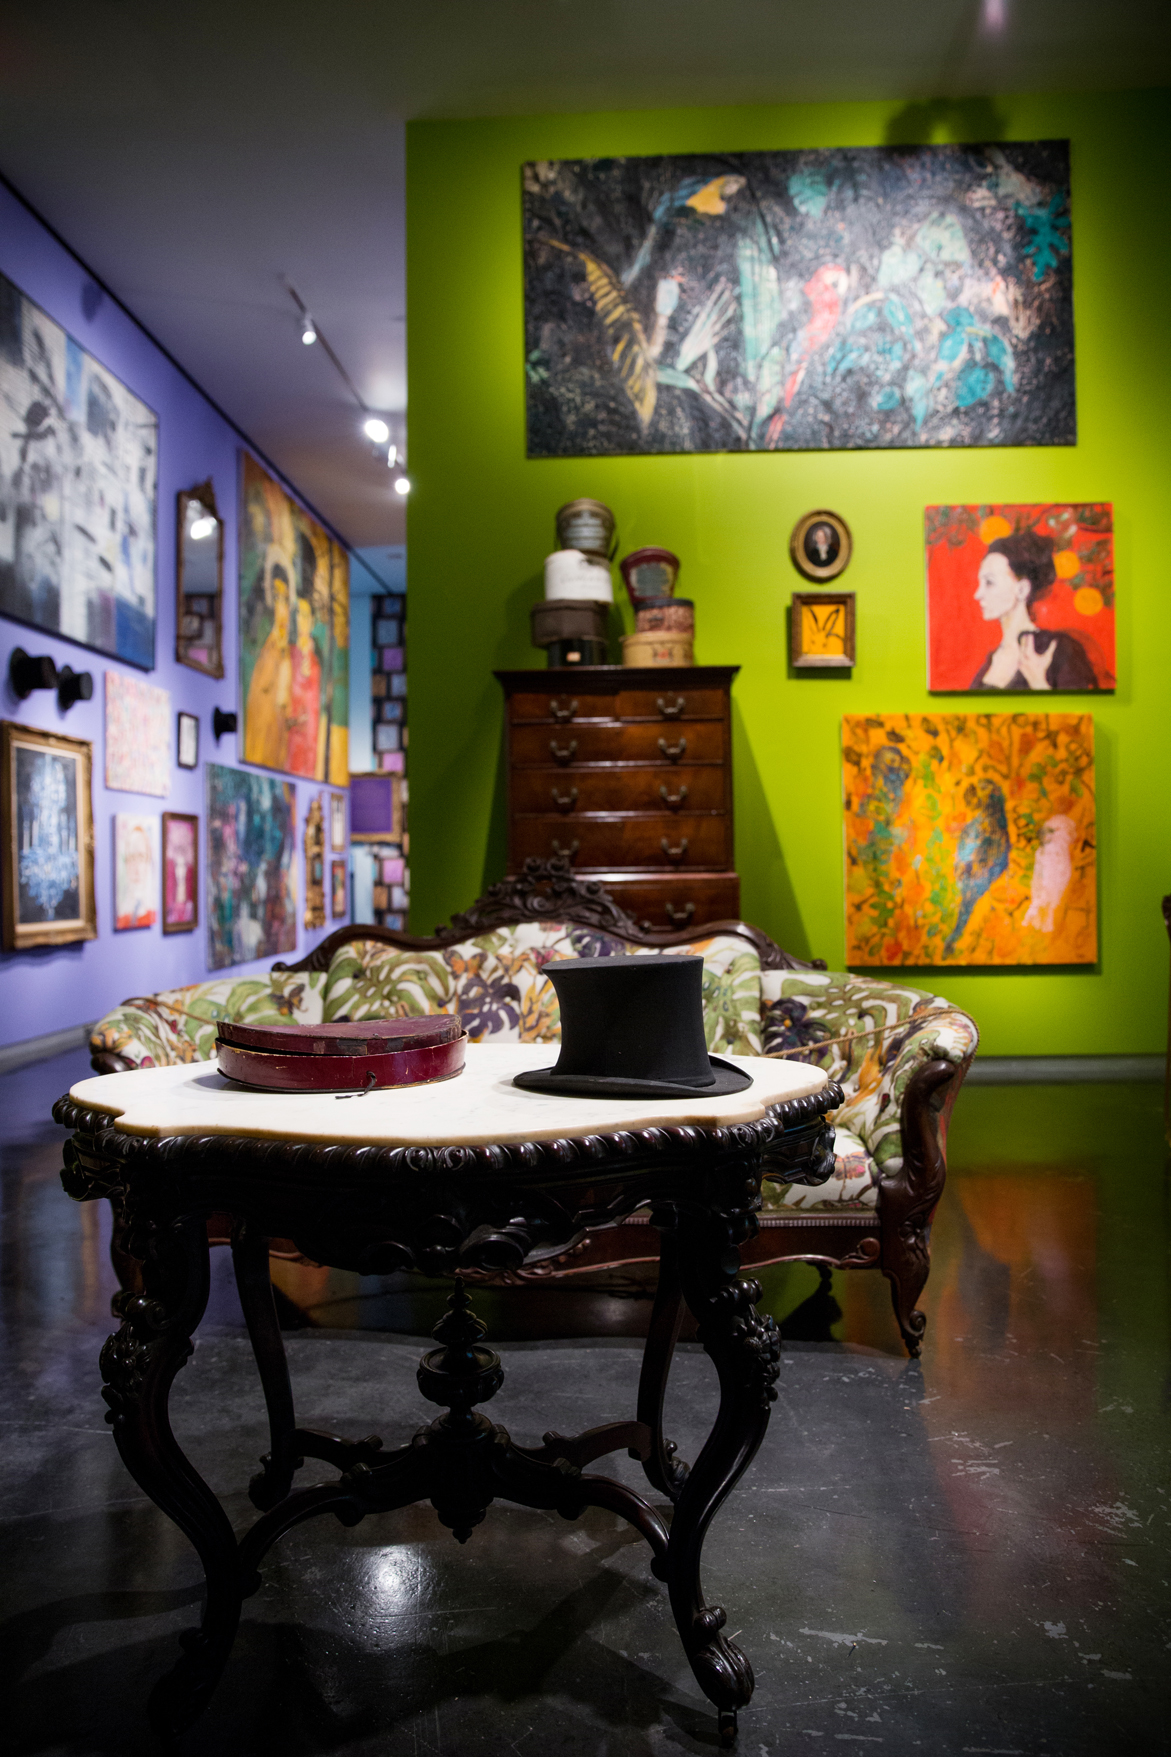 The exhibition space was made to reflect the design and character of Slonem’s own homes, with details such as antique chandeliers and pieces from his top hat collection.